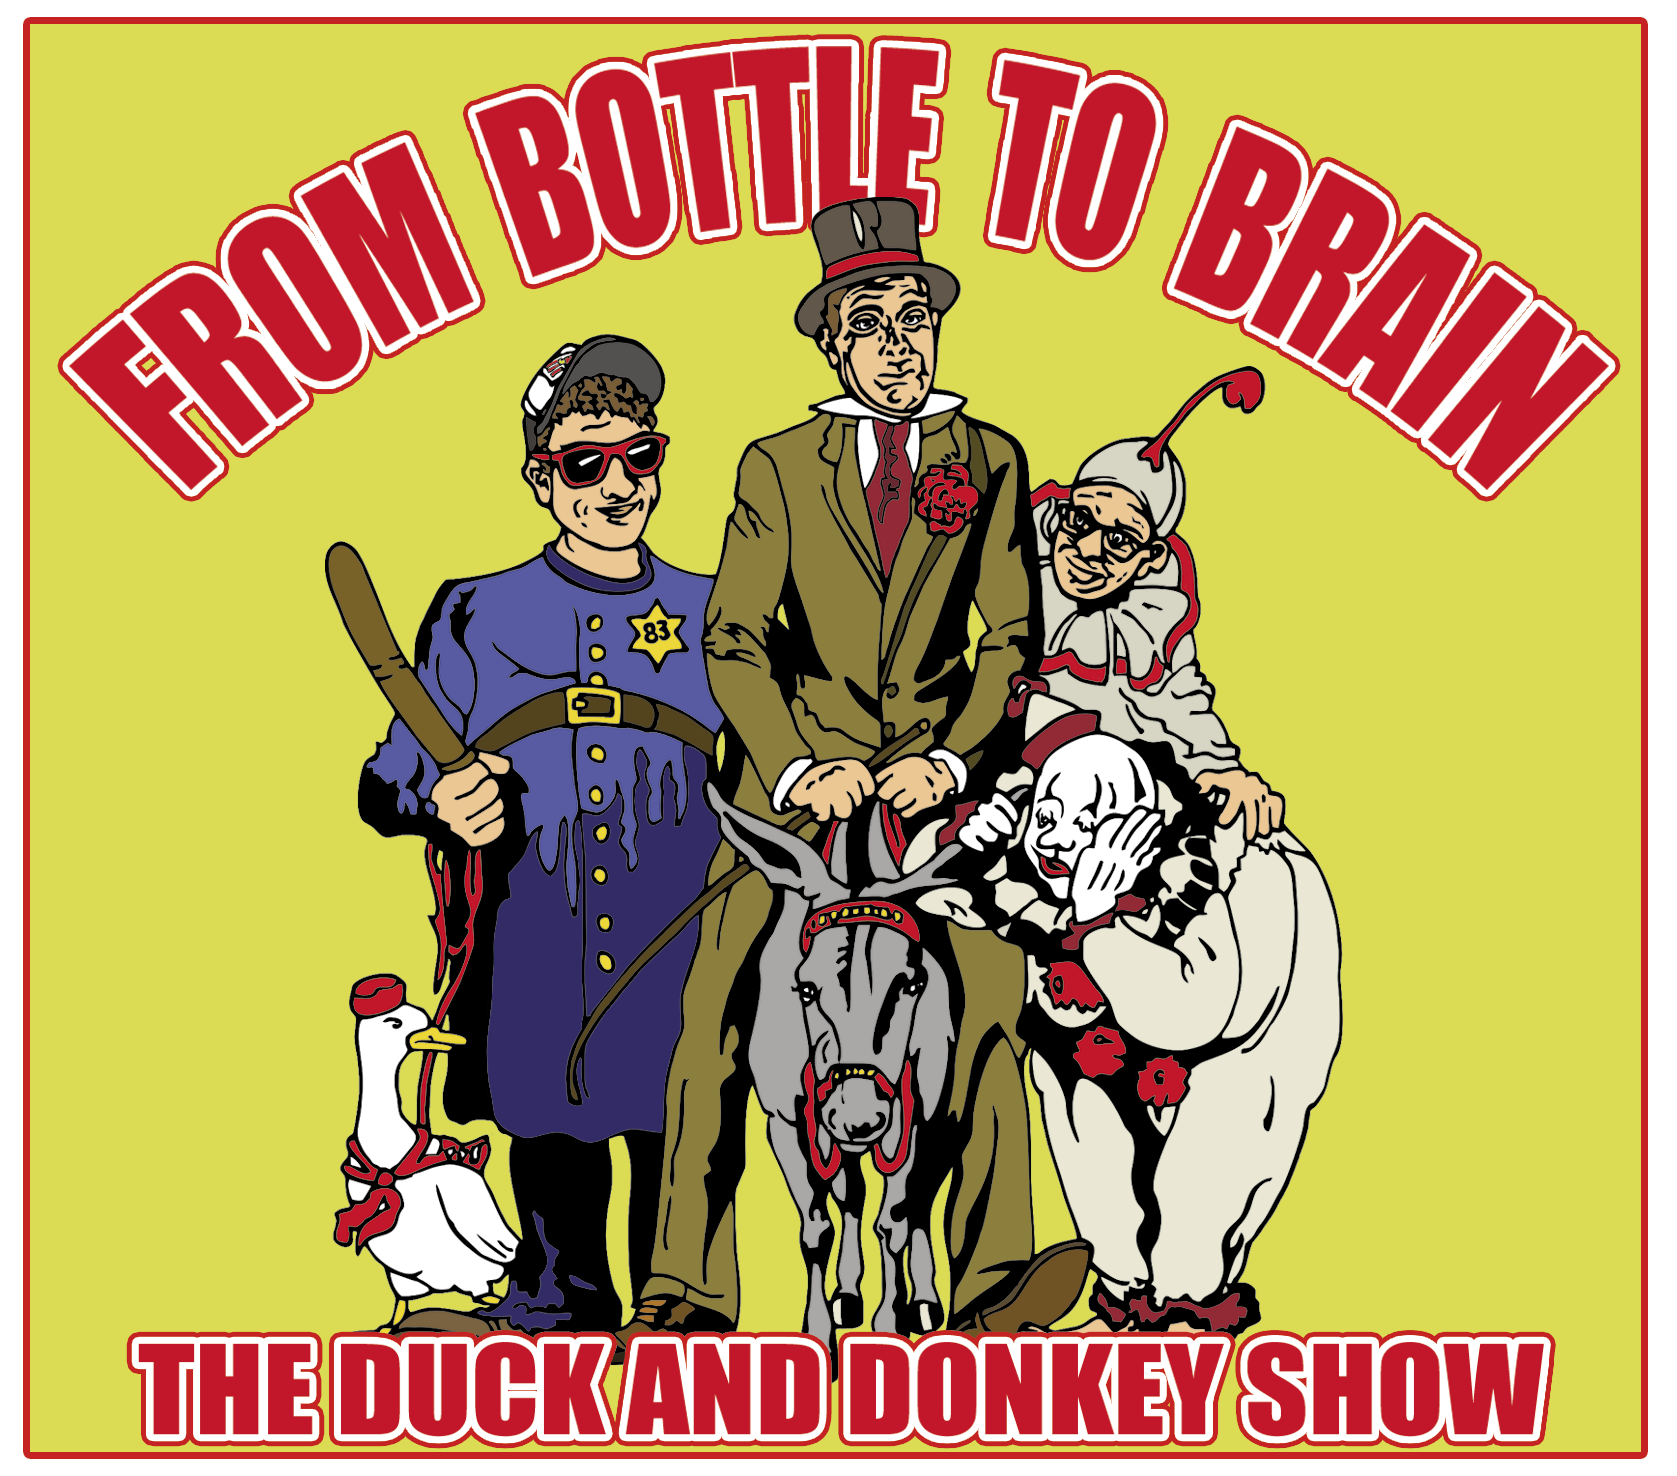 THE DUCK AND DONKEY SHOW